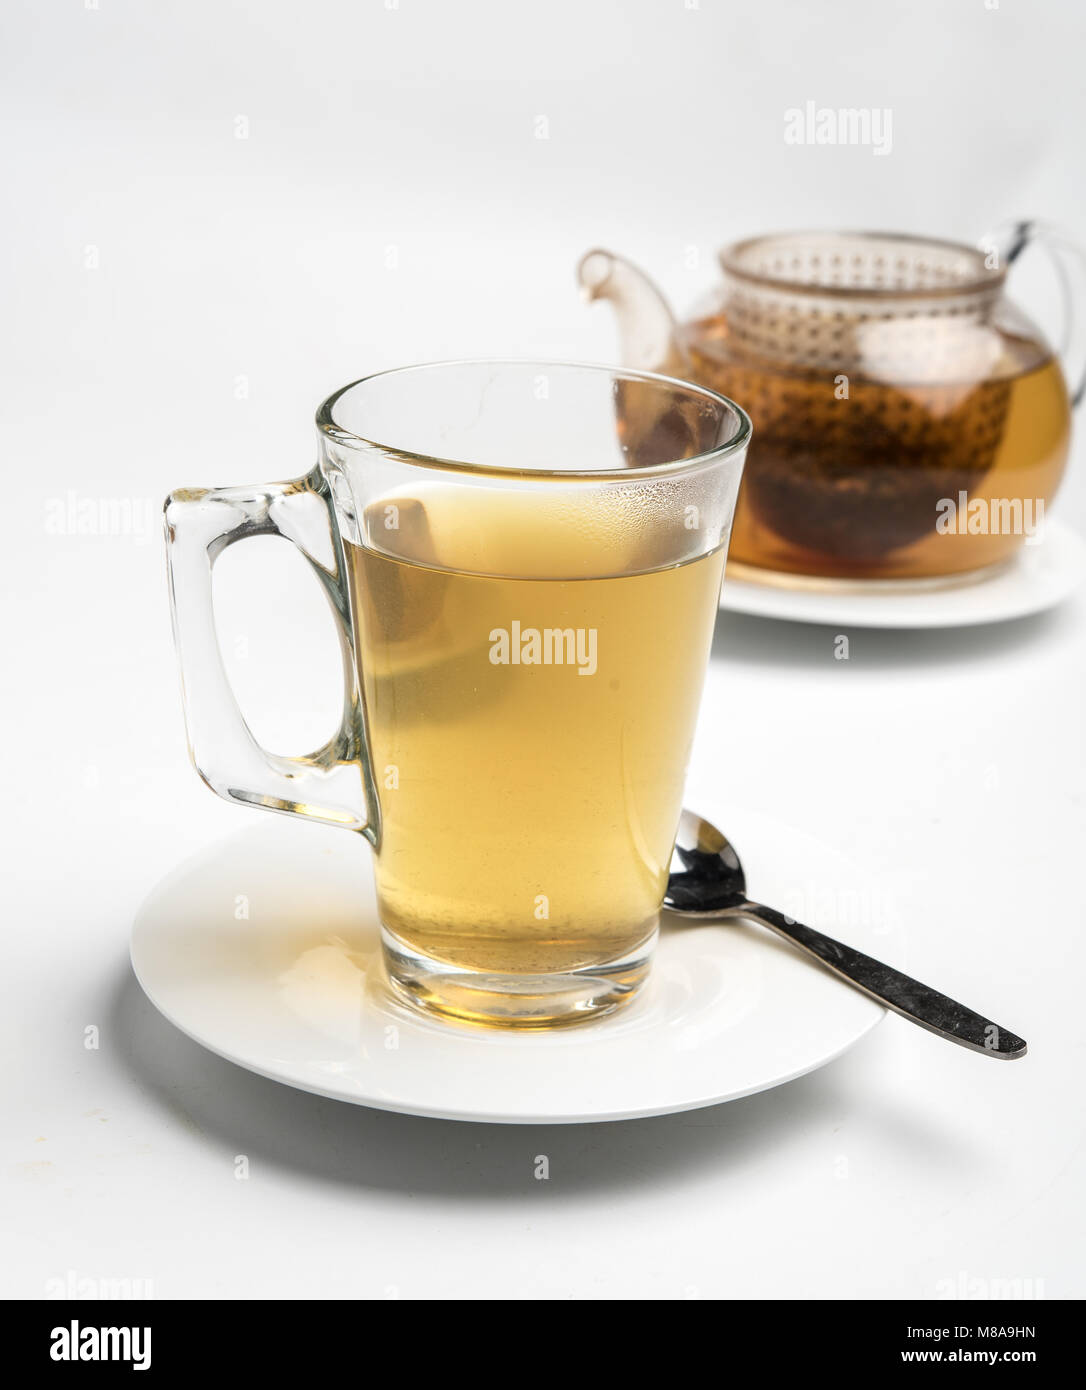 Glass of tea and teapot. The Tea bag can be seen in the pot Stock Photo